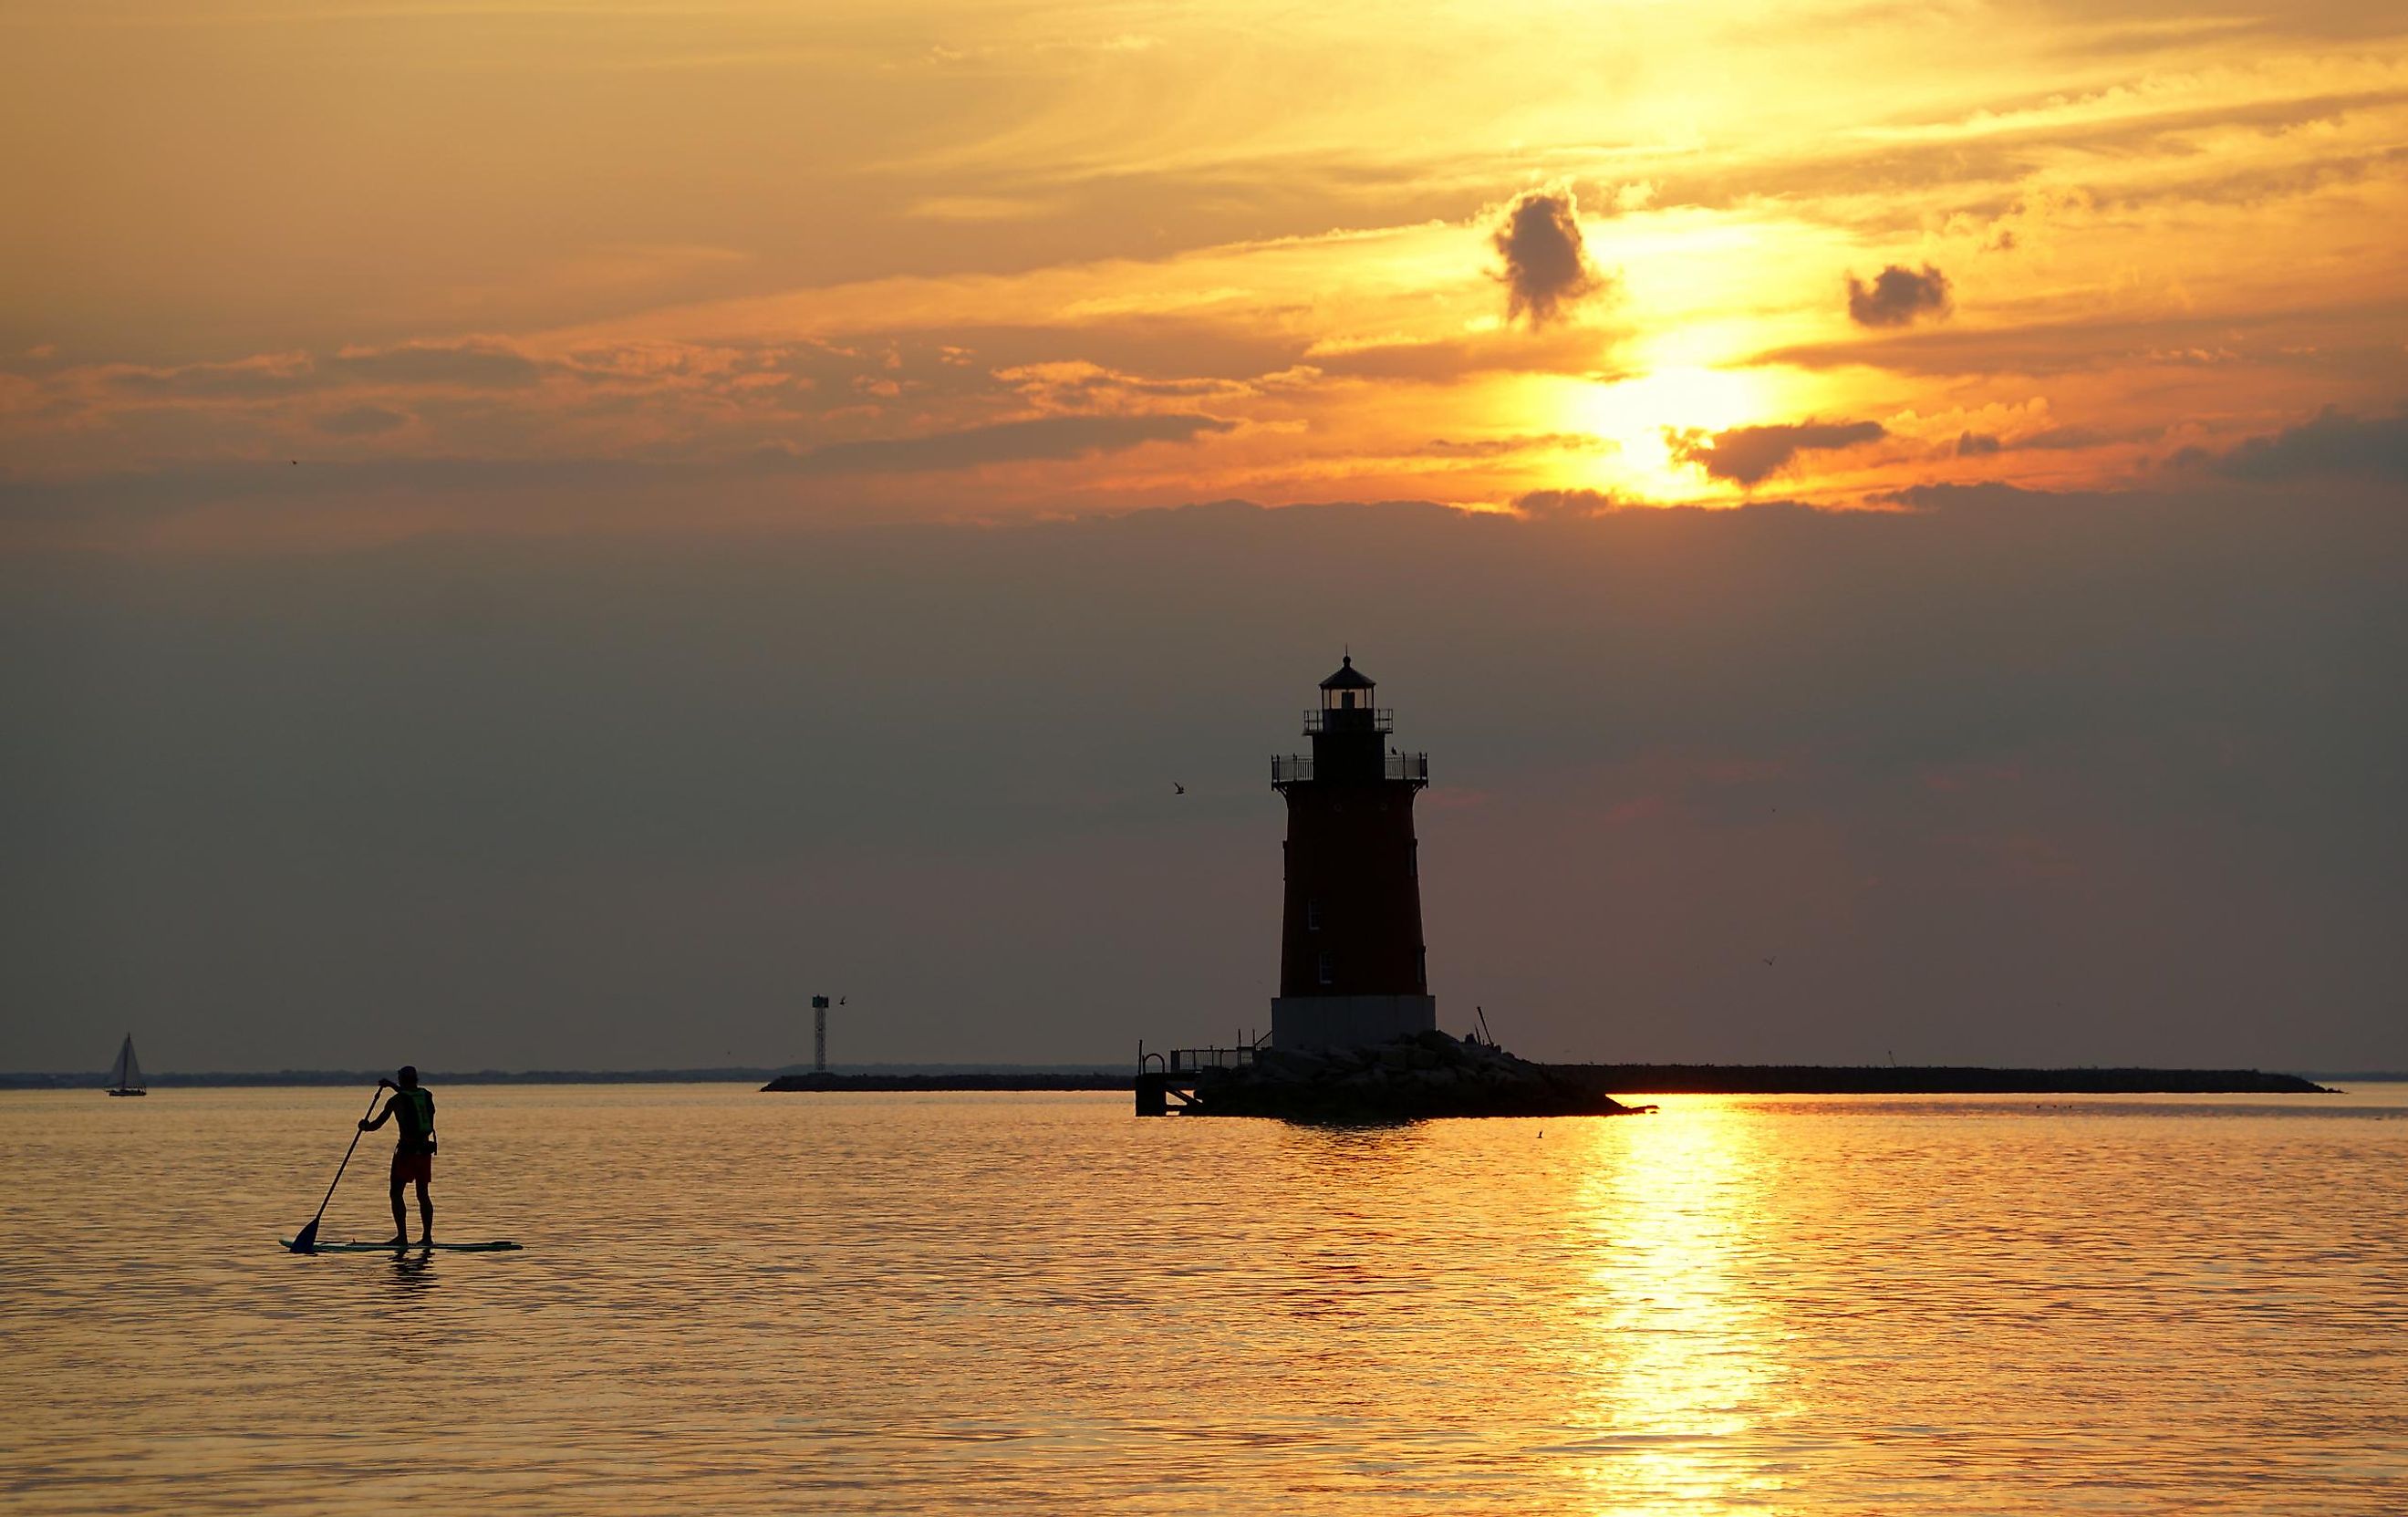 Silhouette of a light house and a man on a paddle board during sunset at Cape Henlopen State Park, Lewes, Delaware.